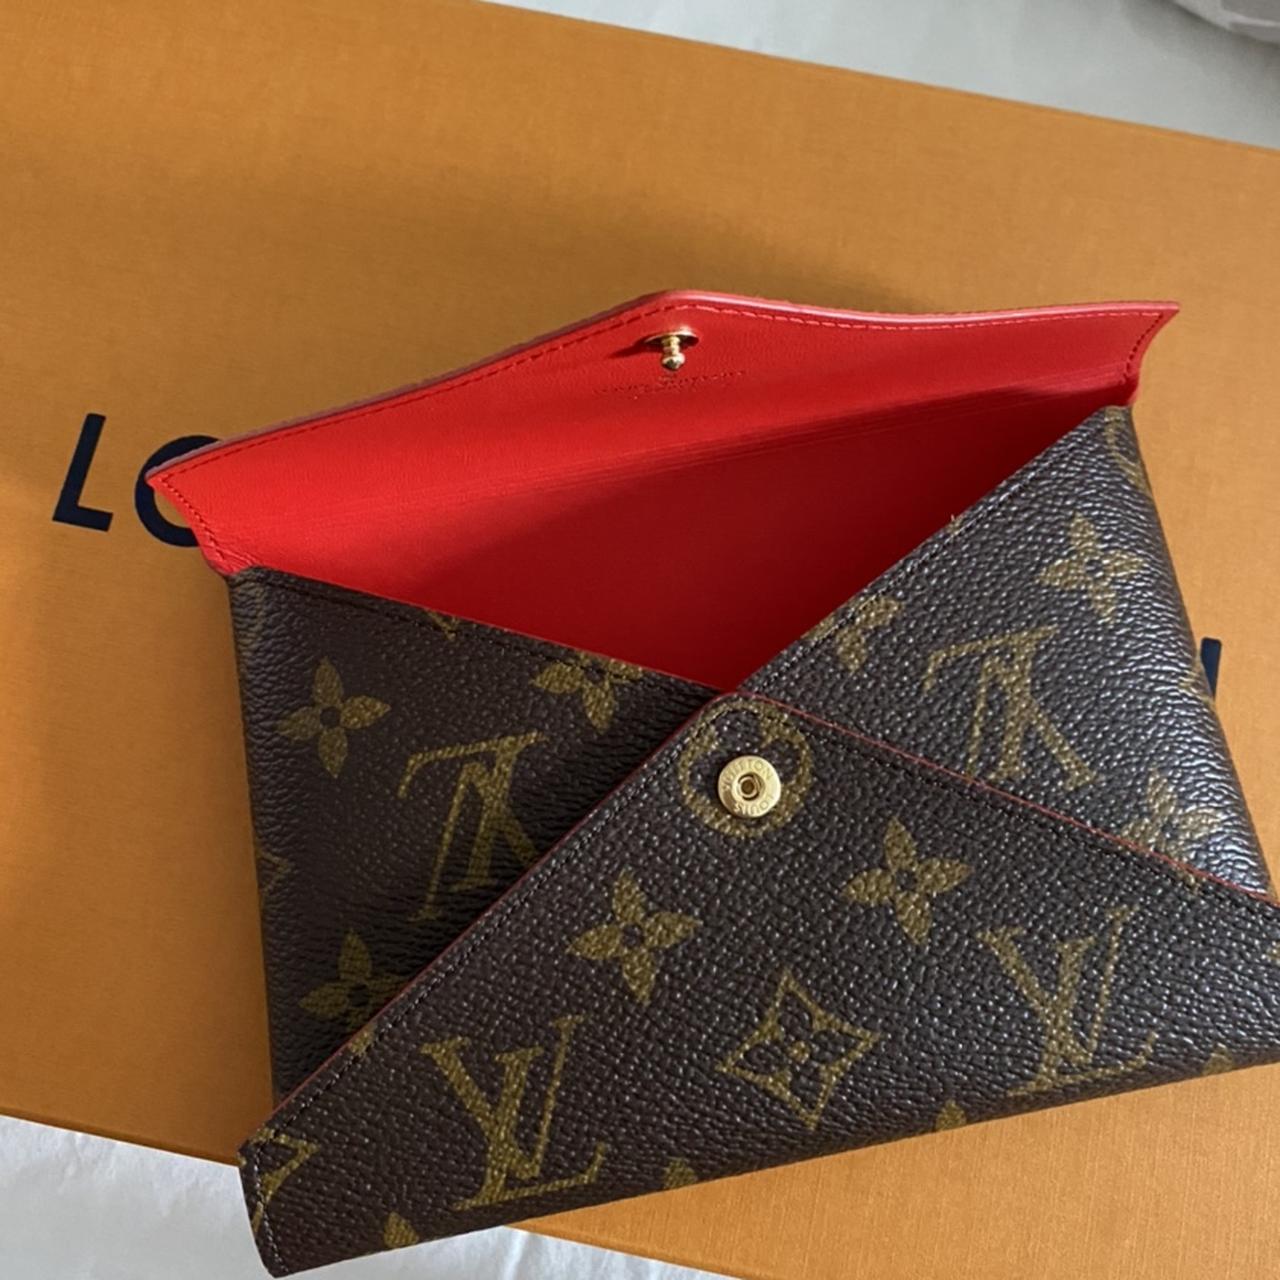 Why I bought the Louis Vuitton Kirigami Set + What fits inside